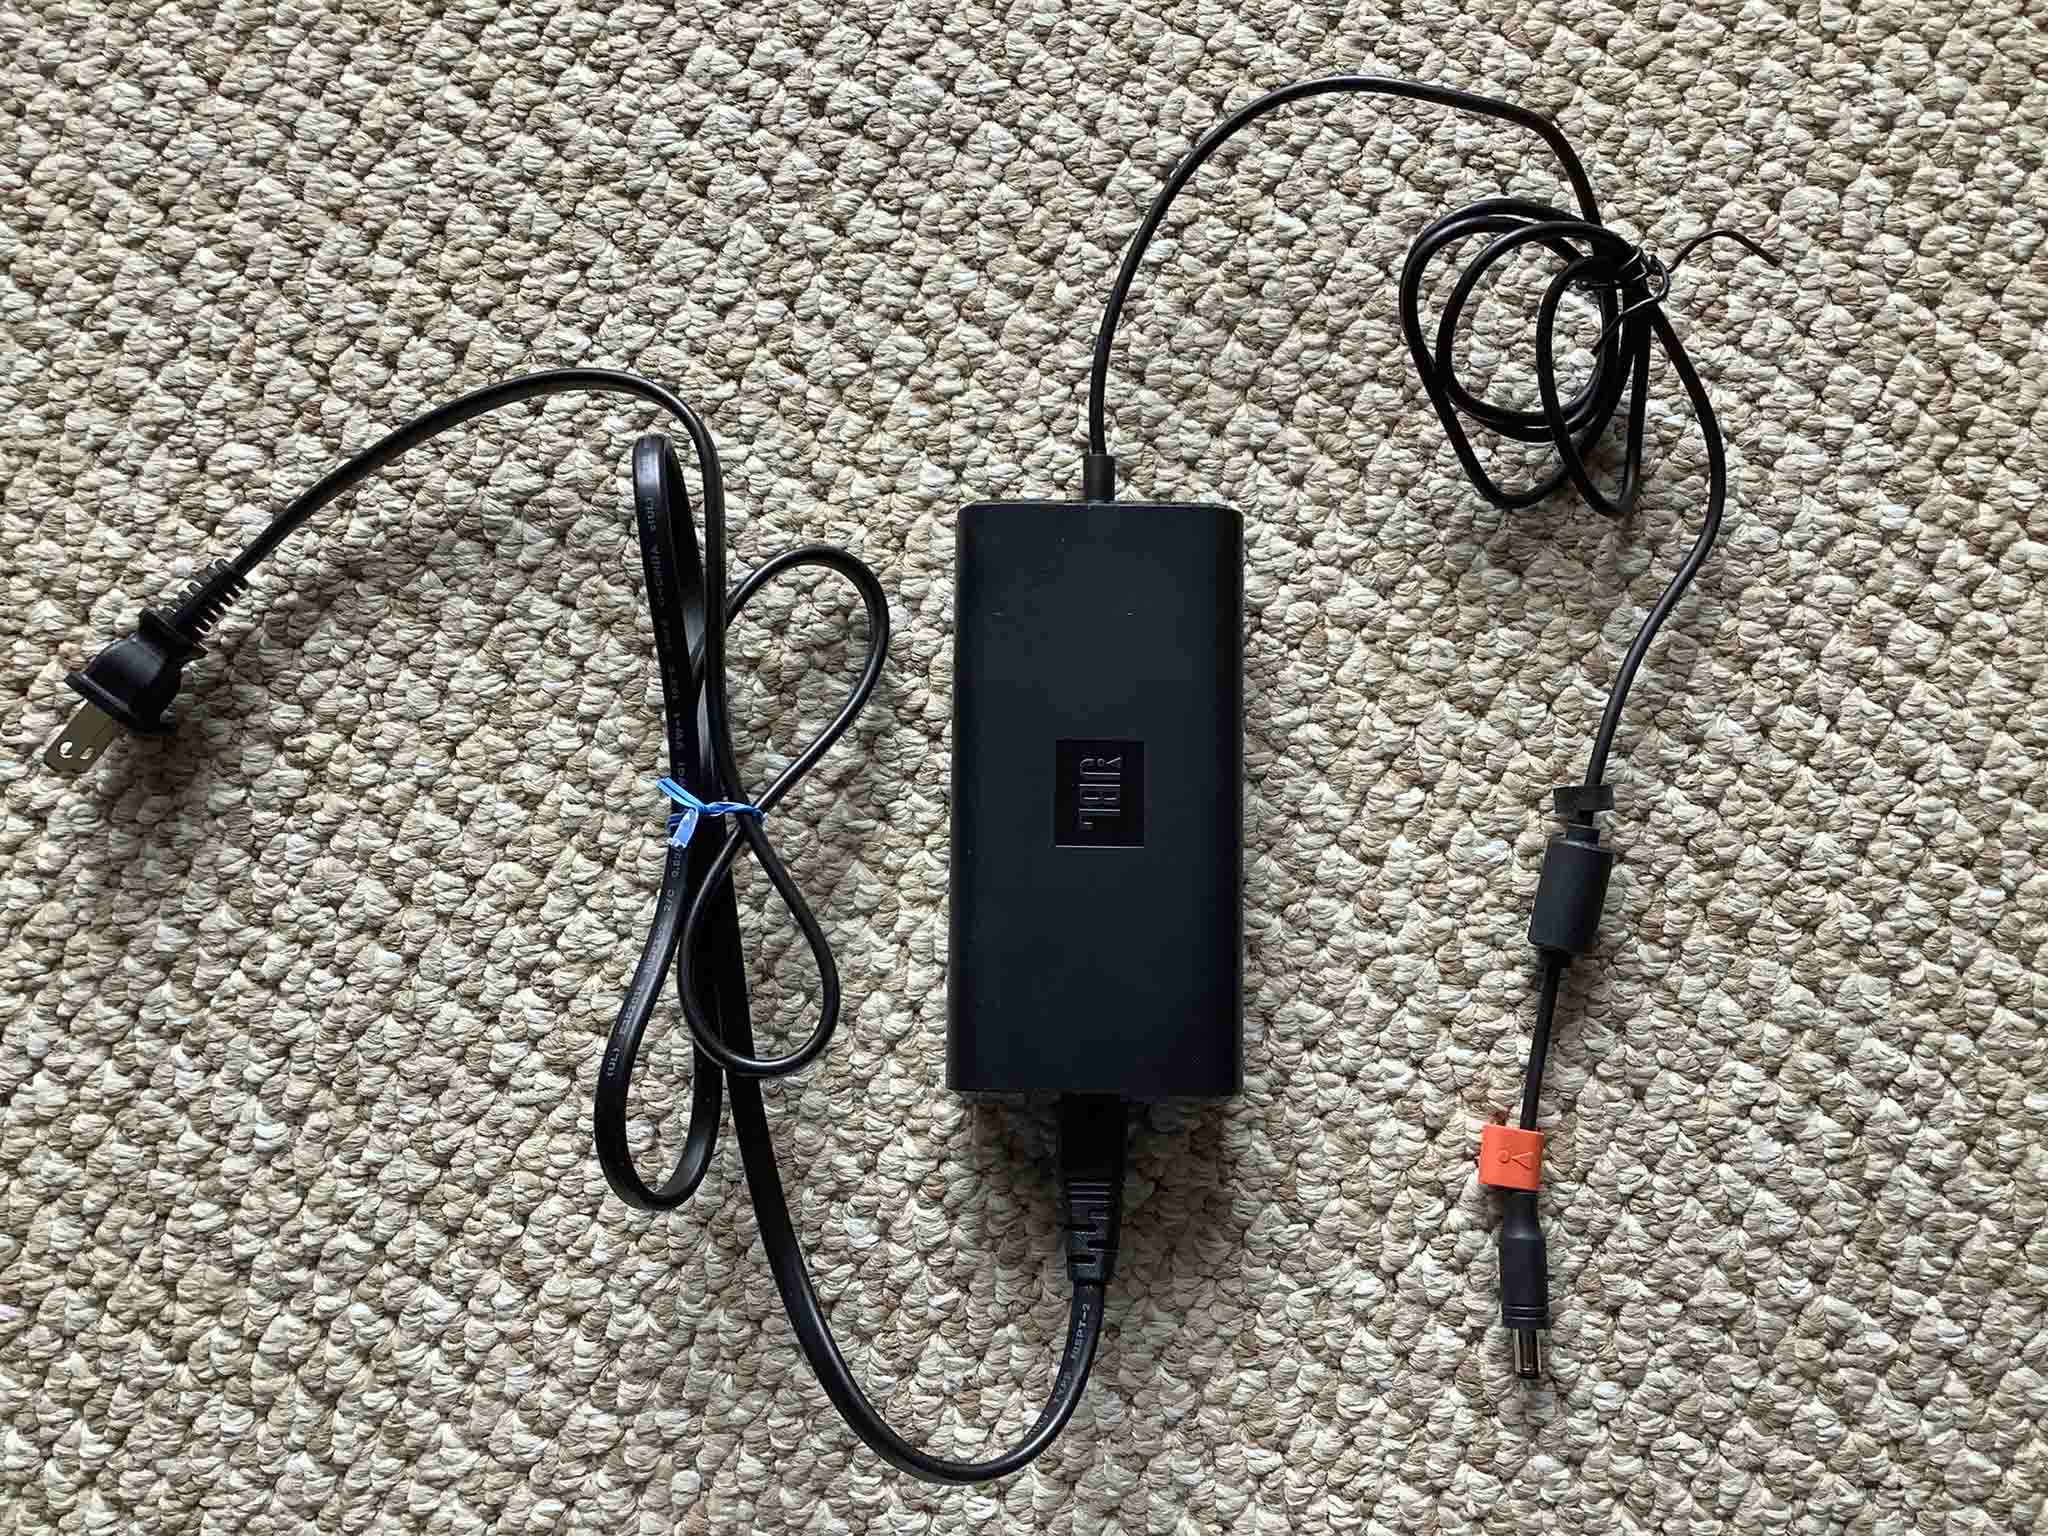 JBL Boombox 2 Charger Specs Details - Stop